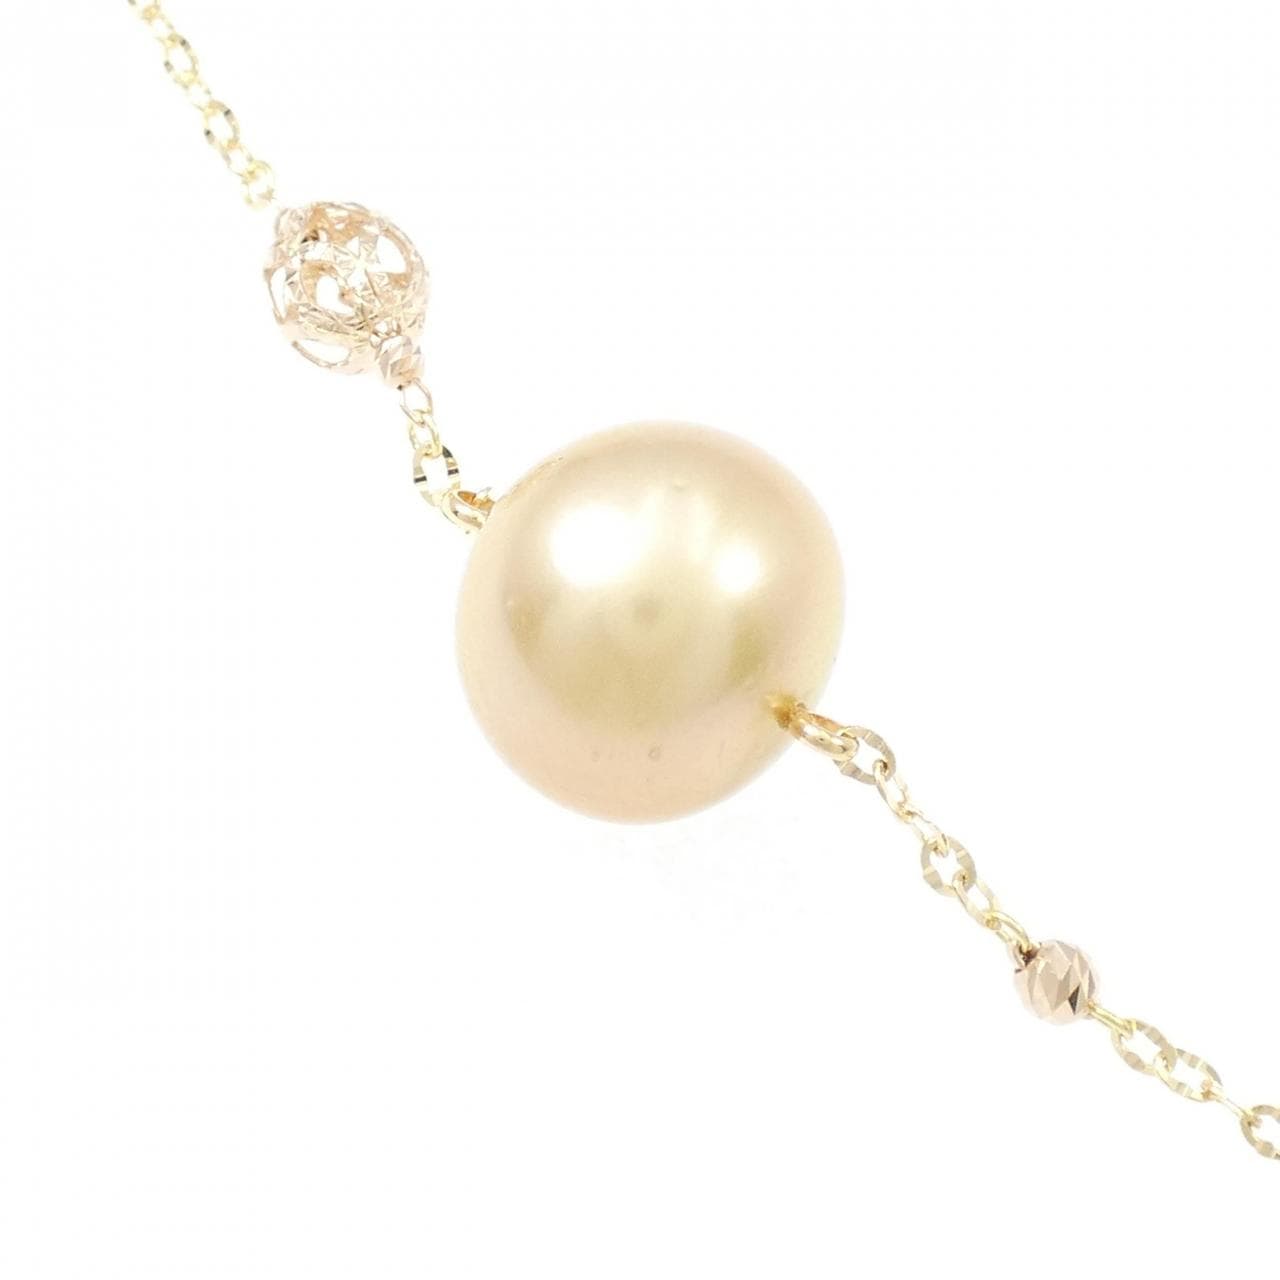 K18YG/K18PG White Butterfly Pearl Necklace